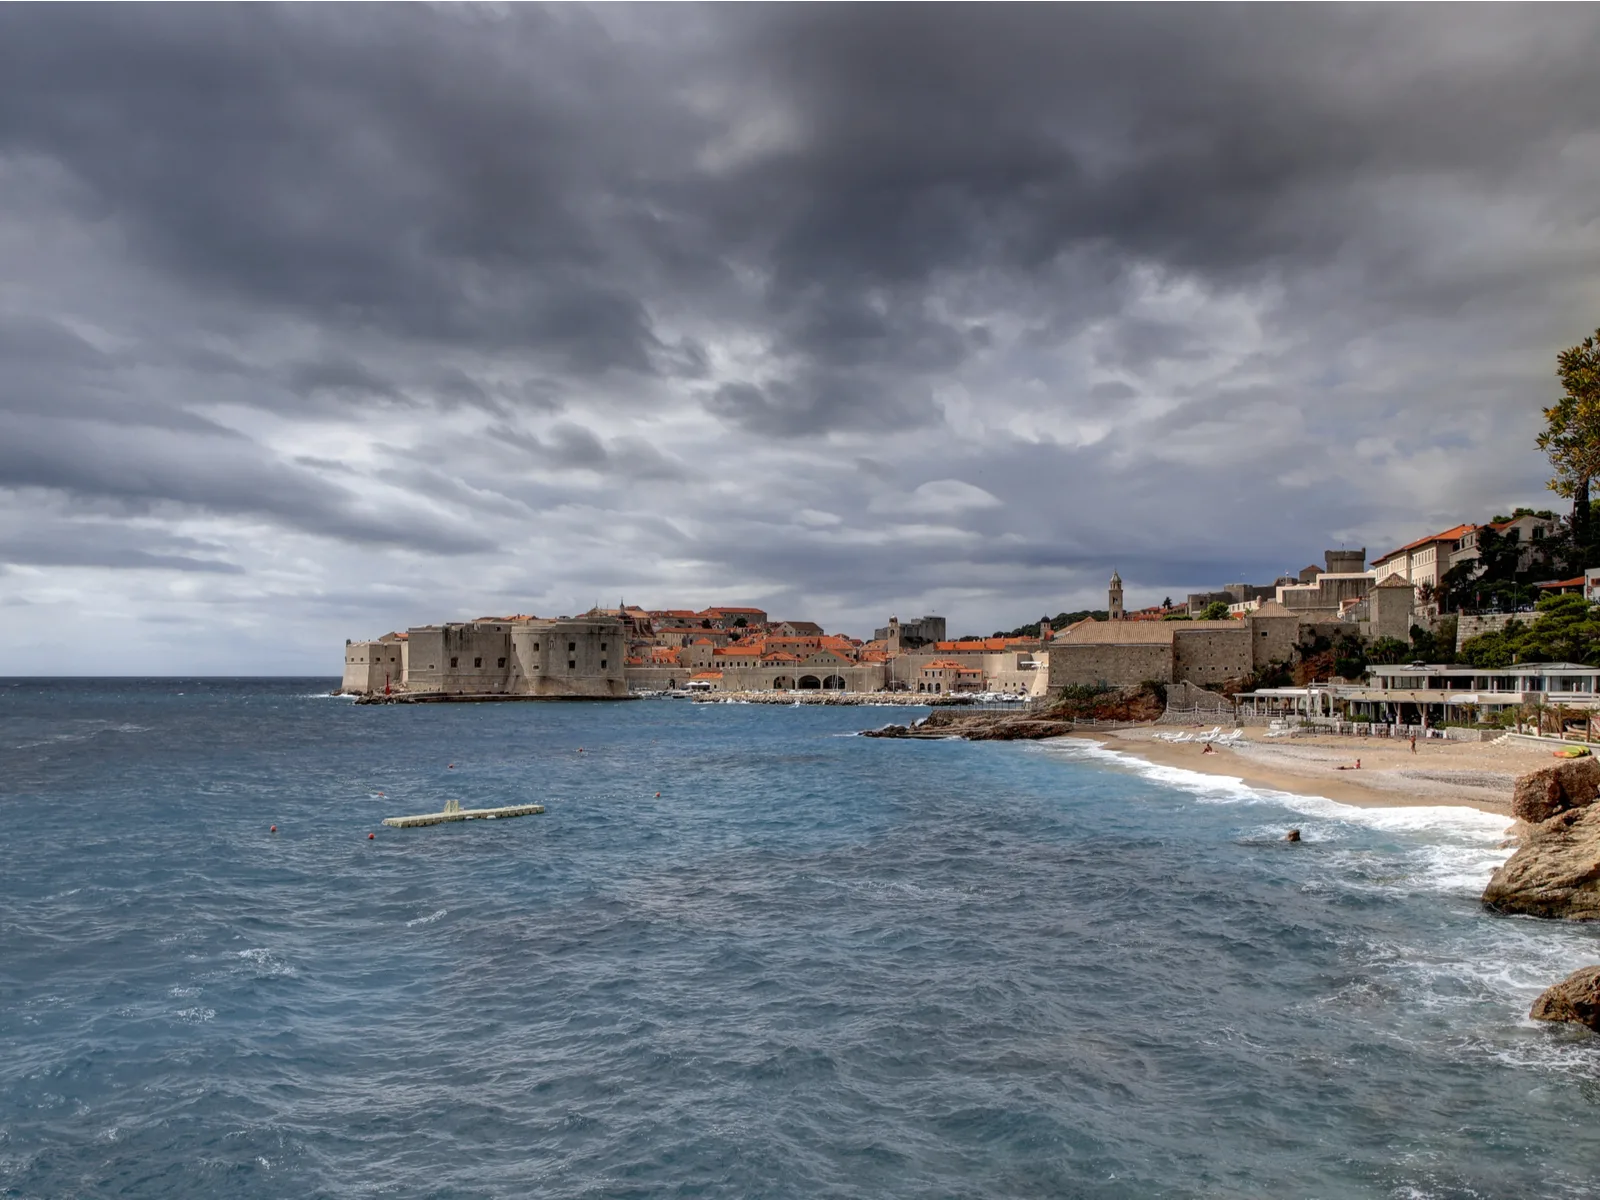 Cloudy sky with rain over the ocean during the worst time to visit Croatia